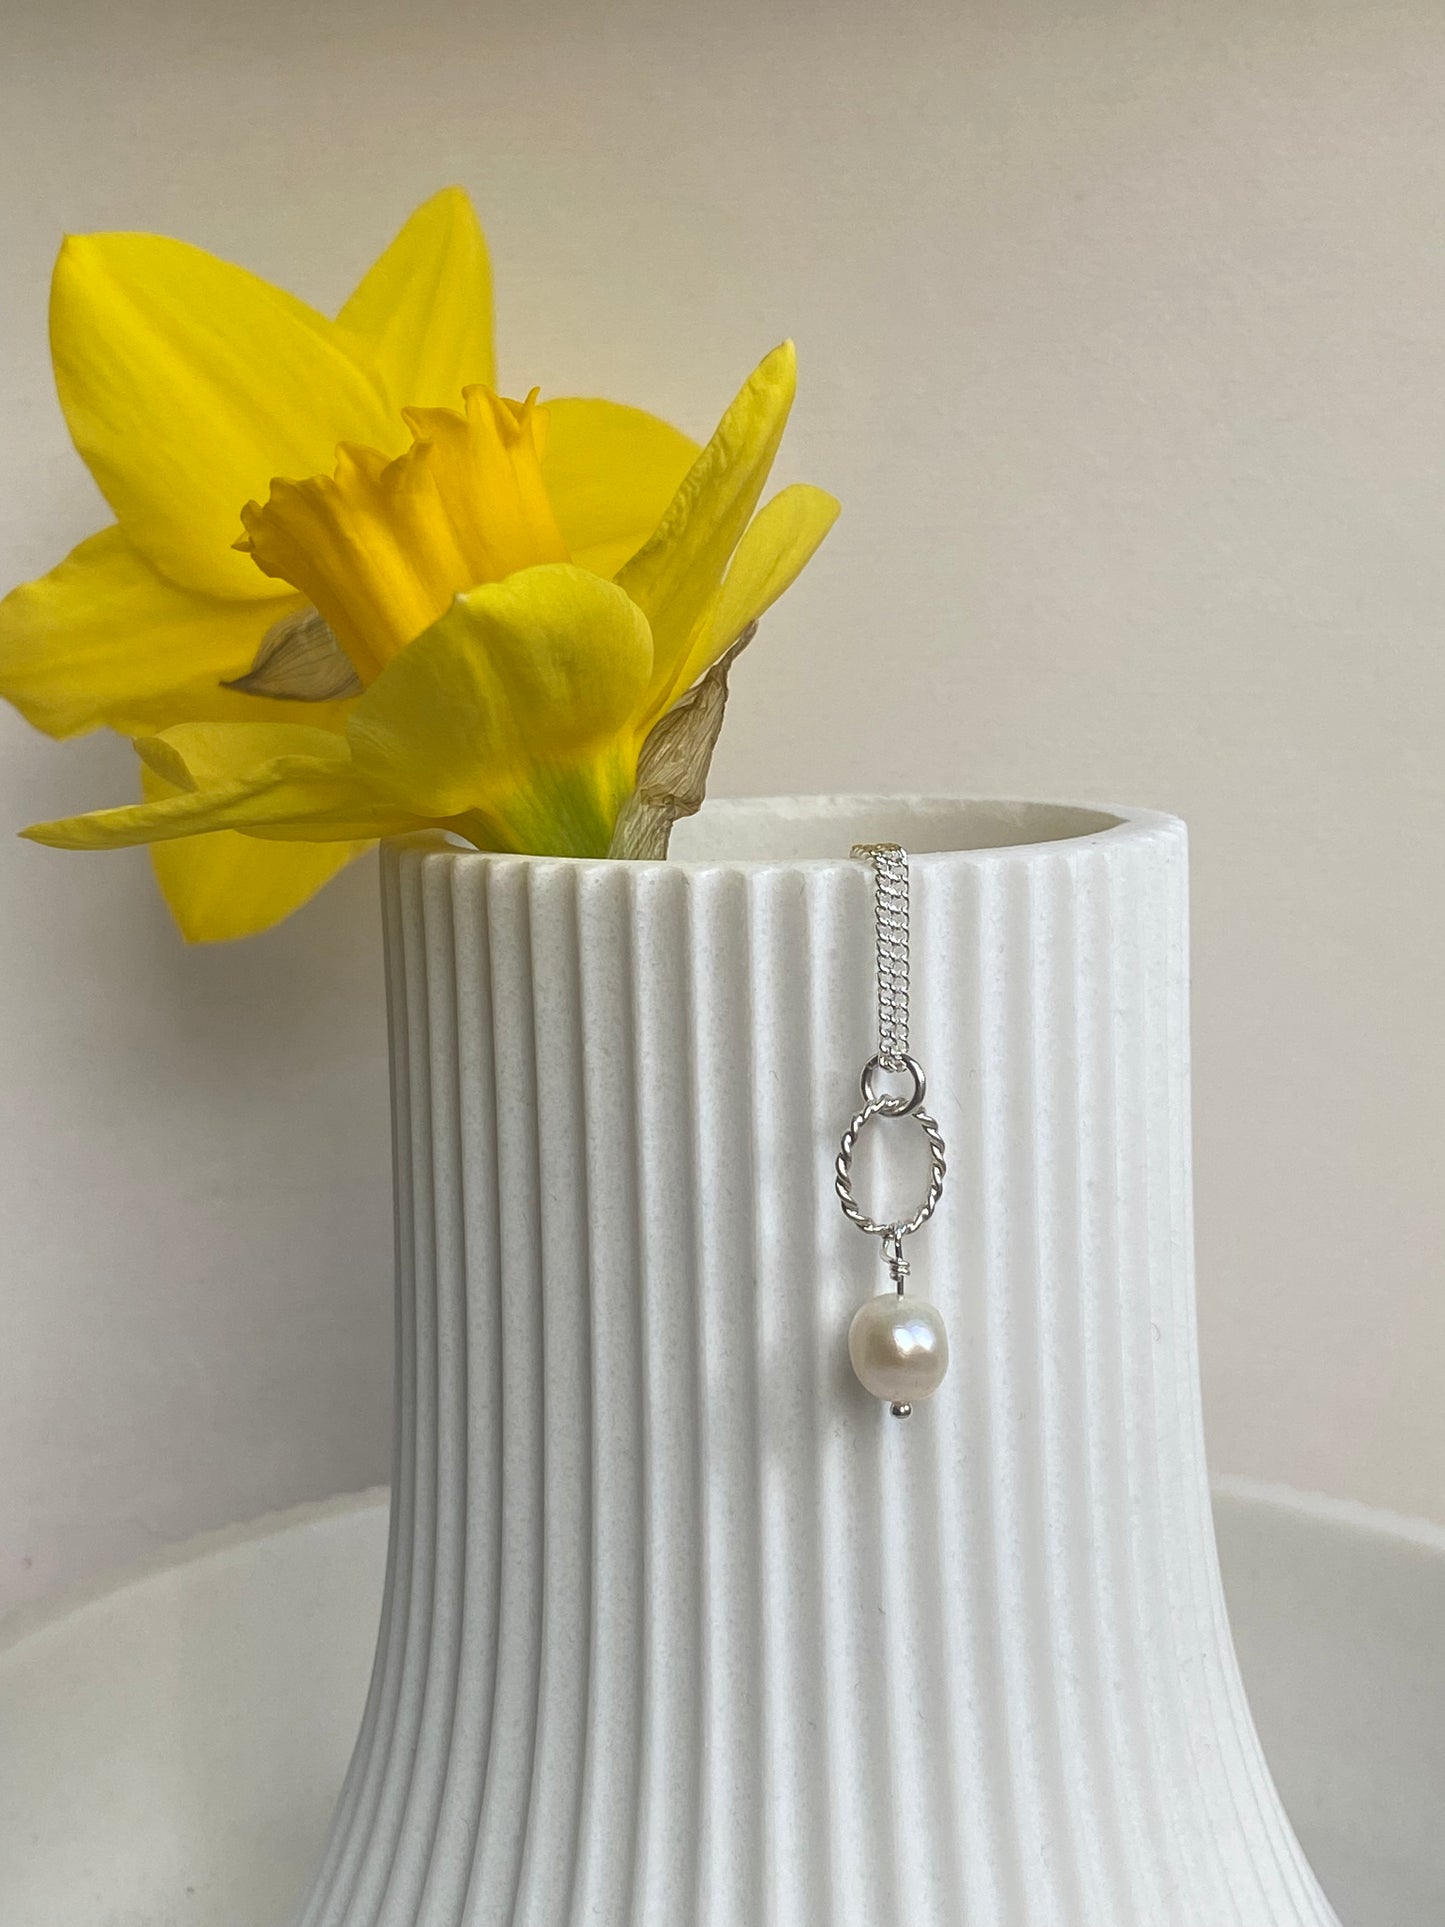 White freshwater Pearl necklace